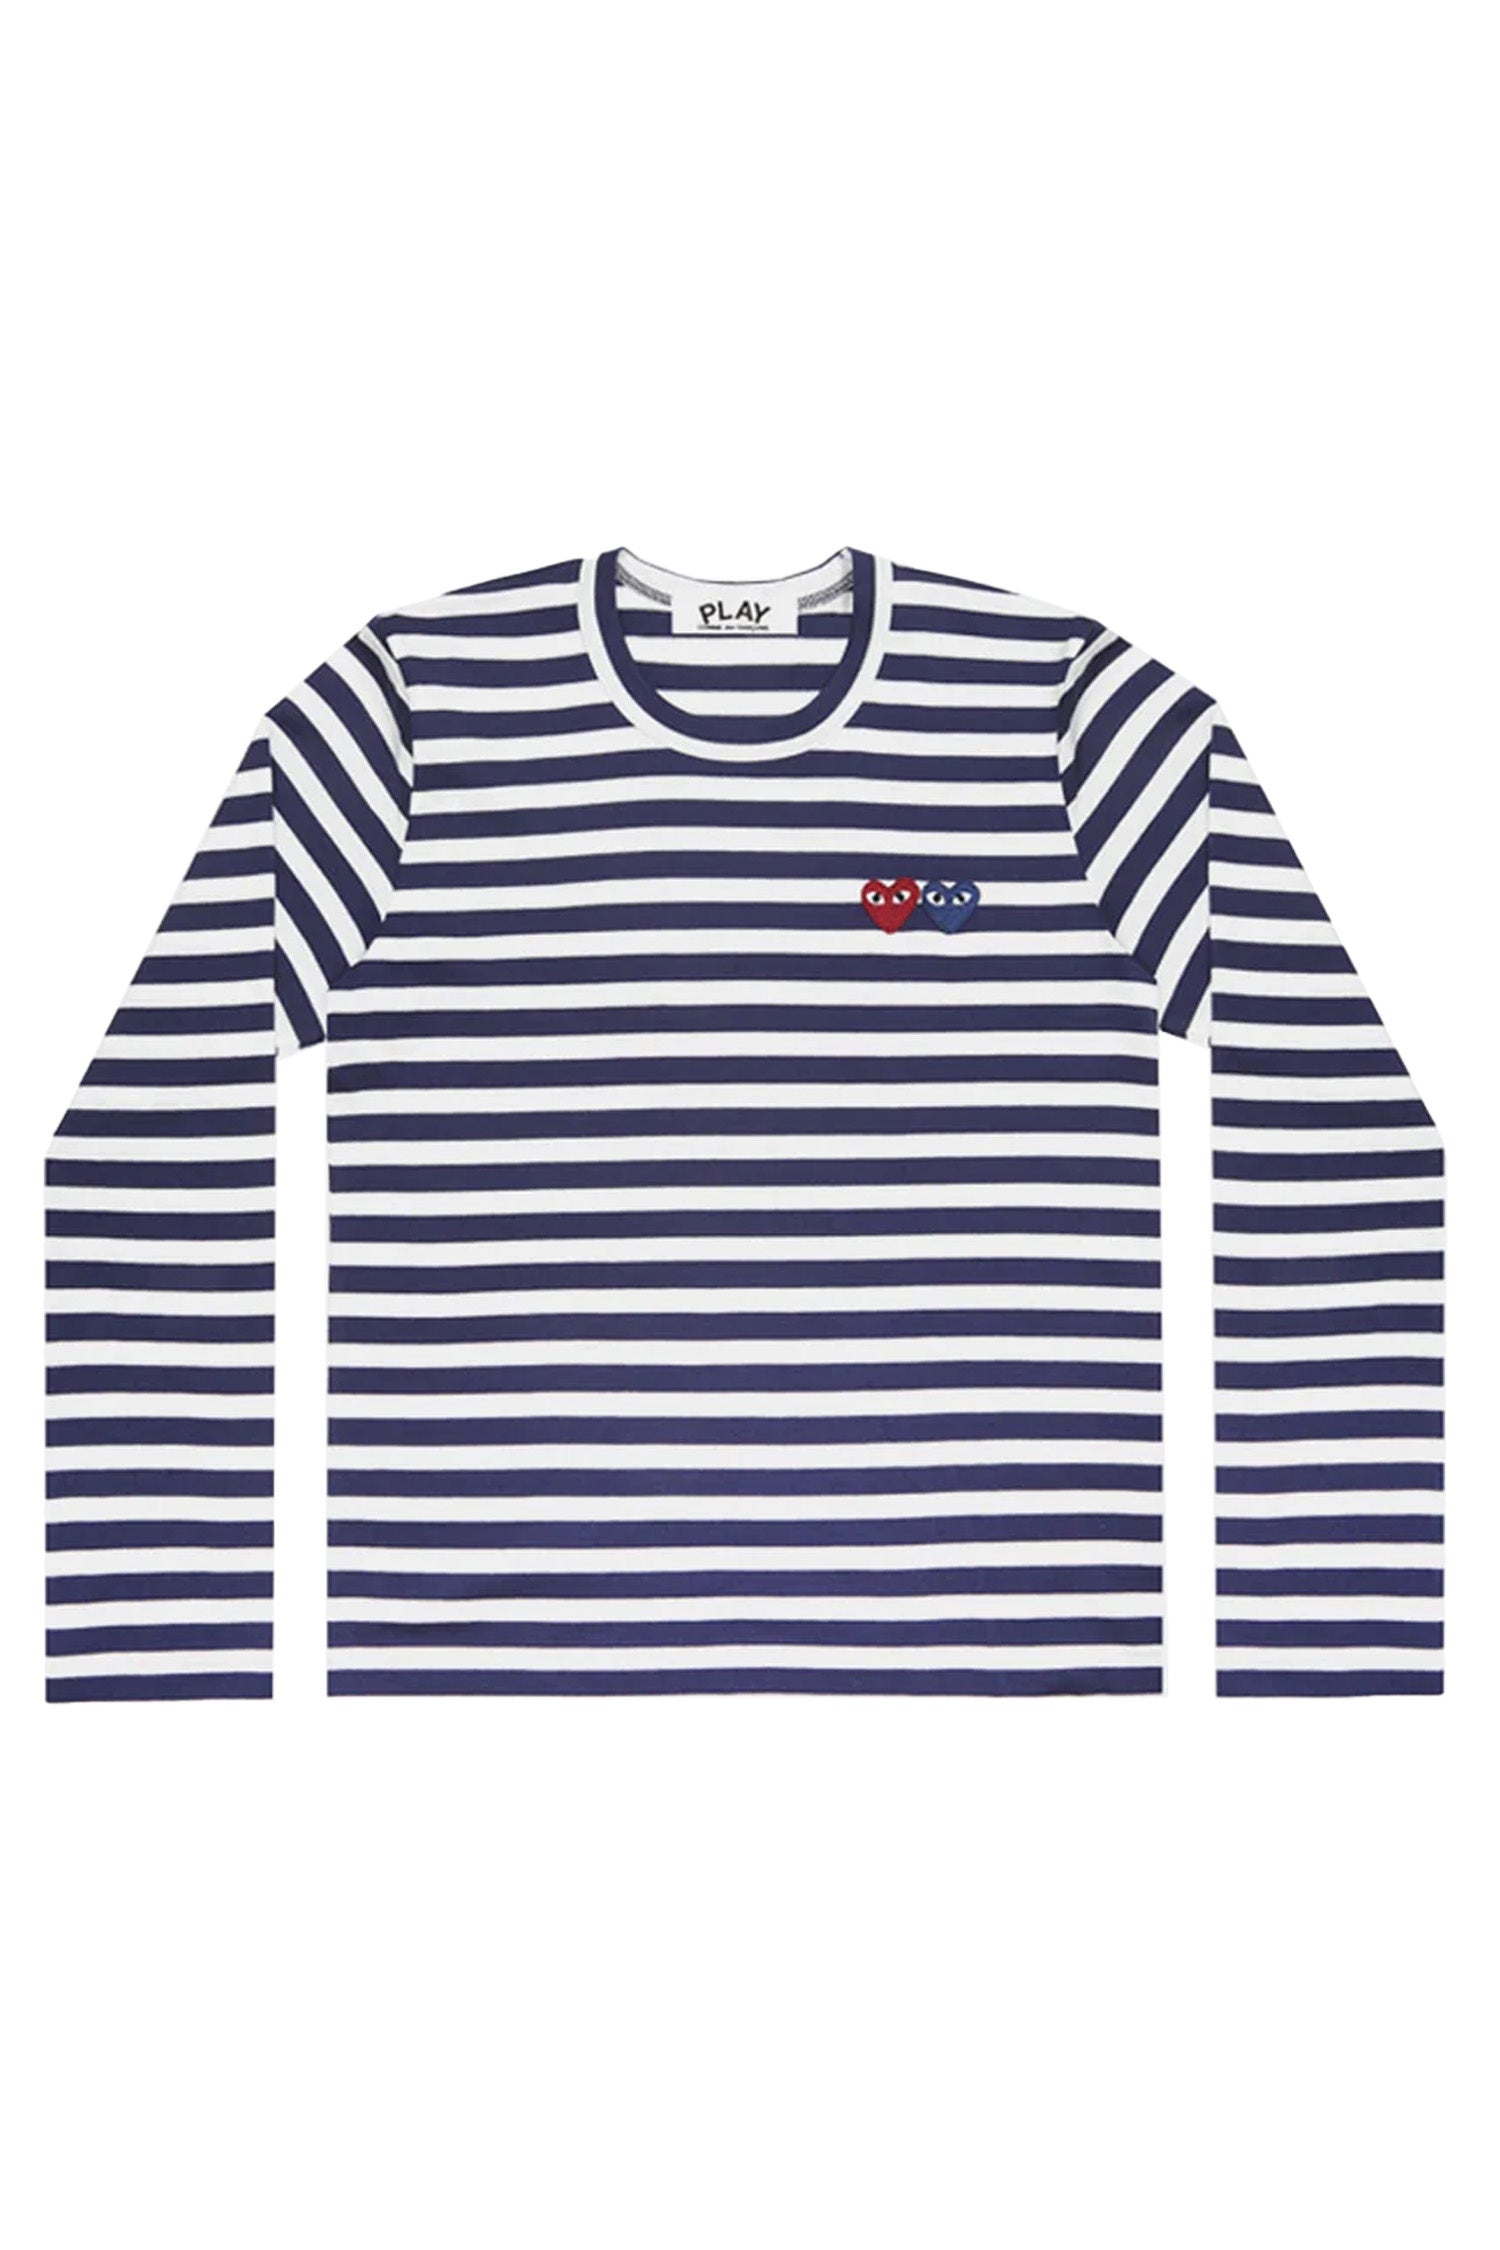 L/S STRIPED T-SHIRT IN NAVY/WHITE, SS24